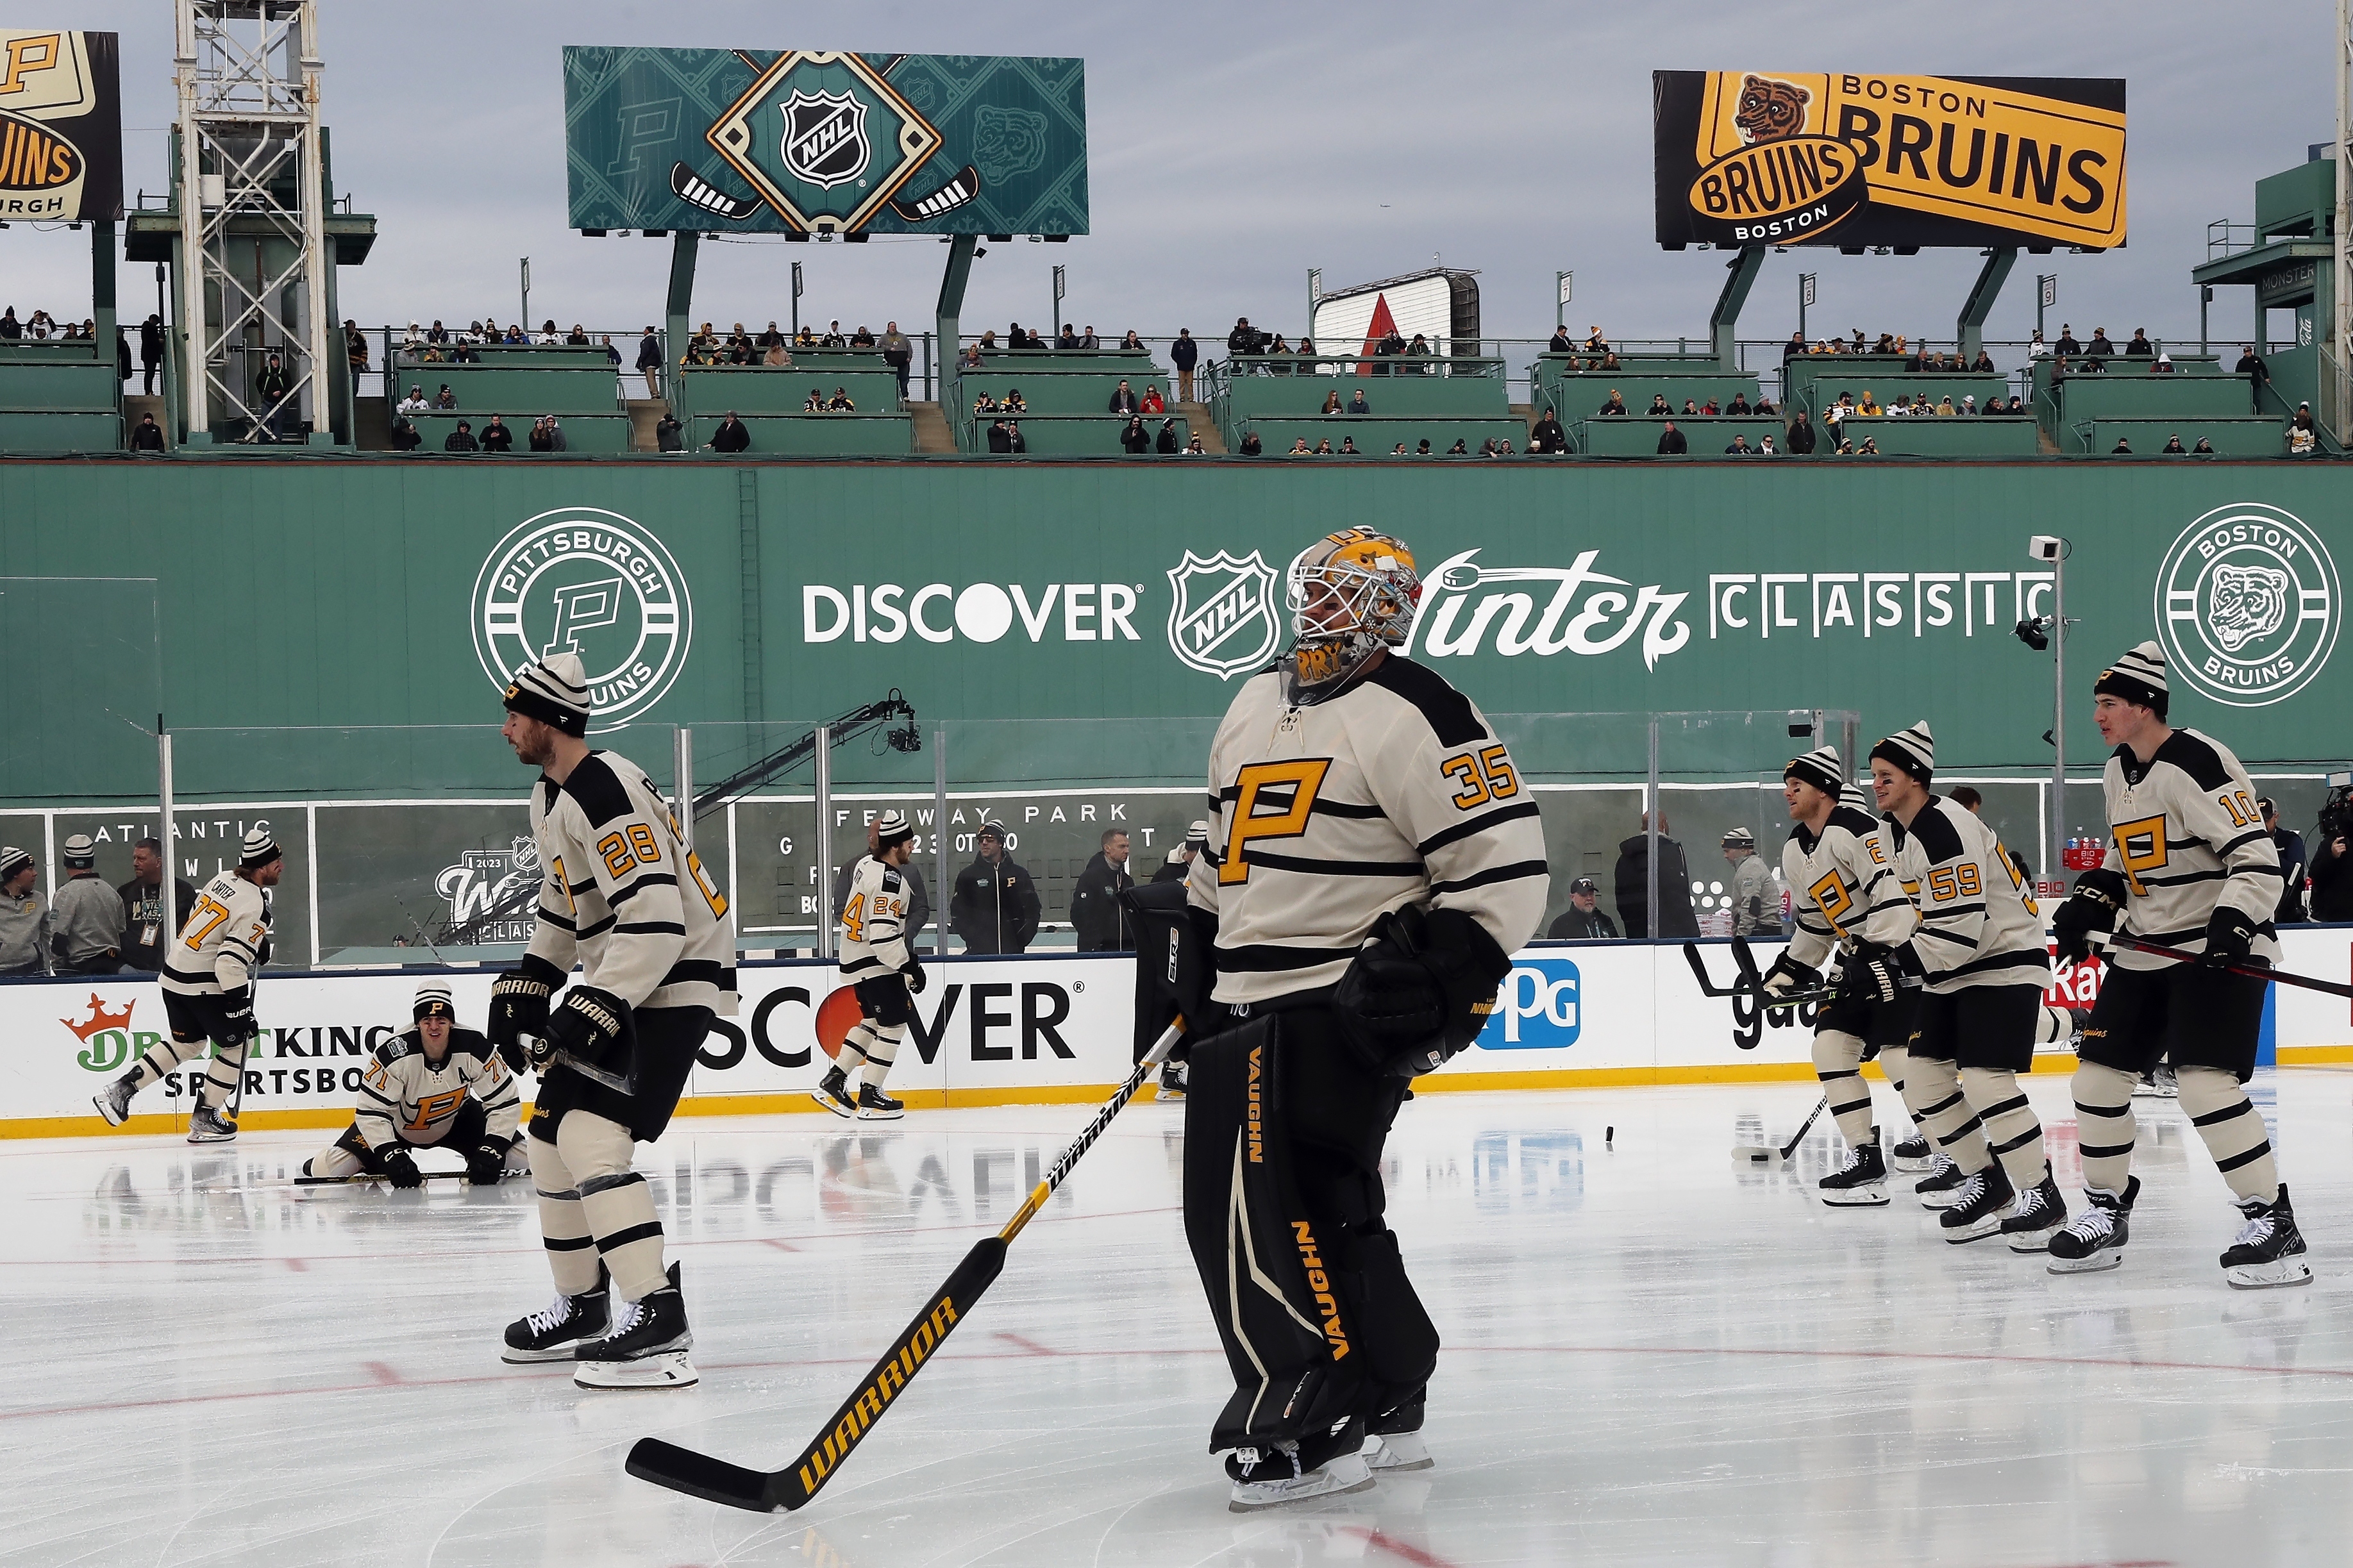 Penguins will face Bruins for 2023 NHL Winter Classic at Fenway Park – WPXI